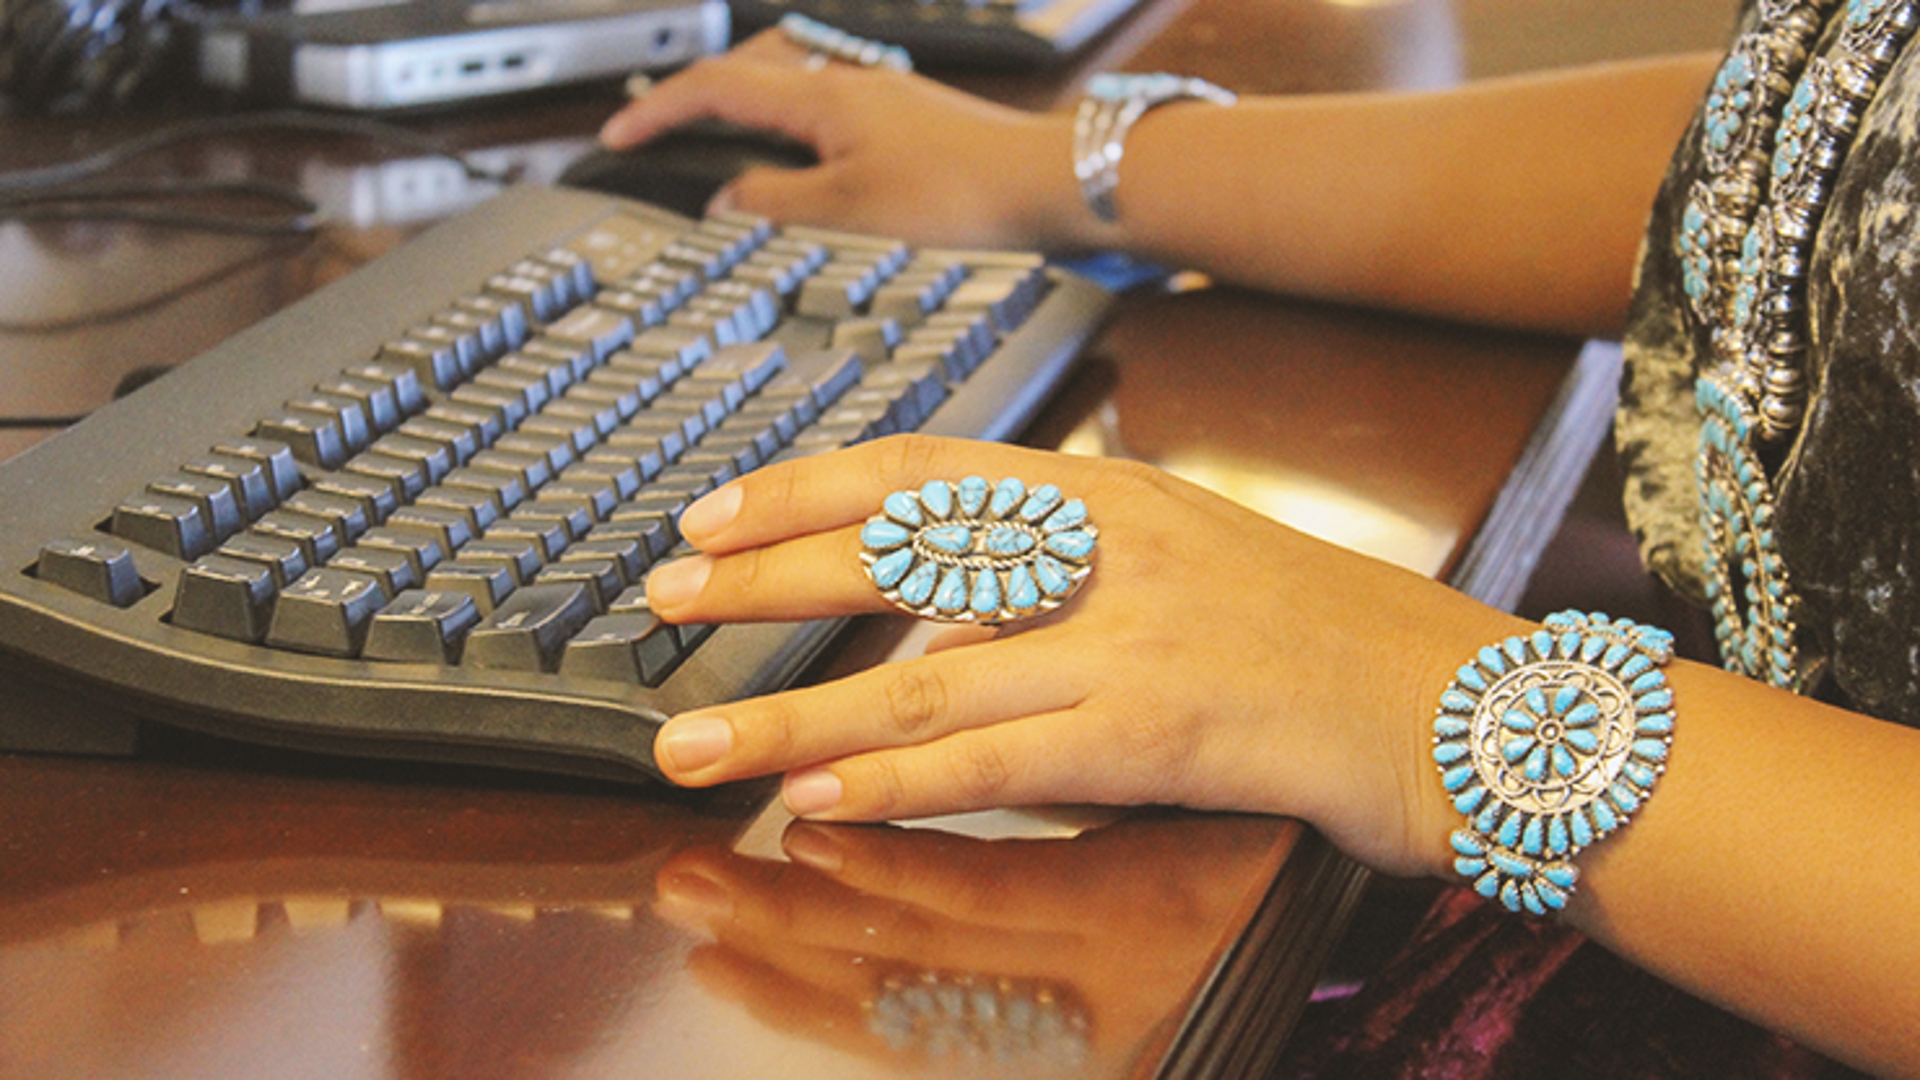 A view of a person's hands with turquoise jewelry typing at a keyboard and using a computer mouse.